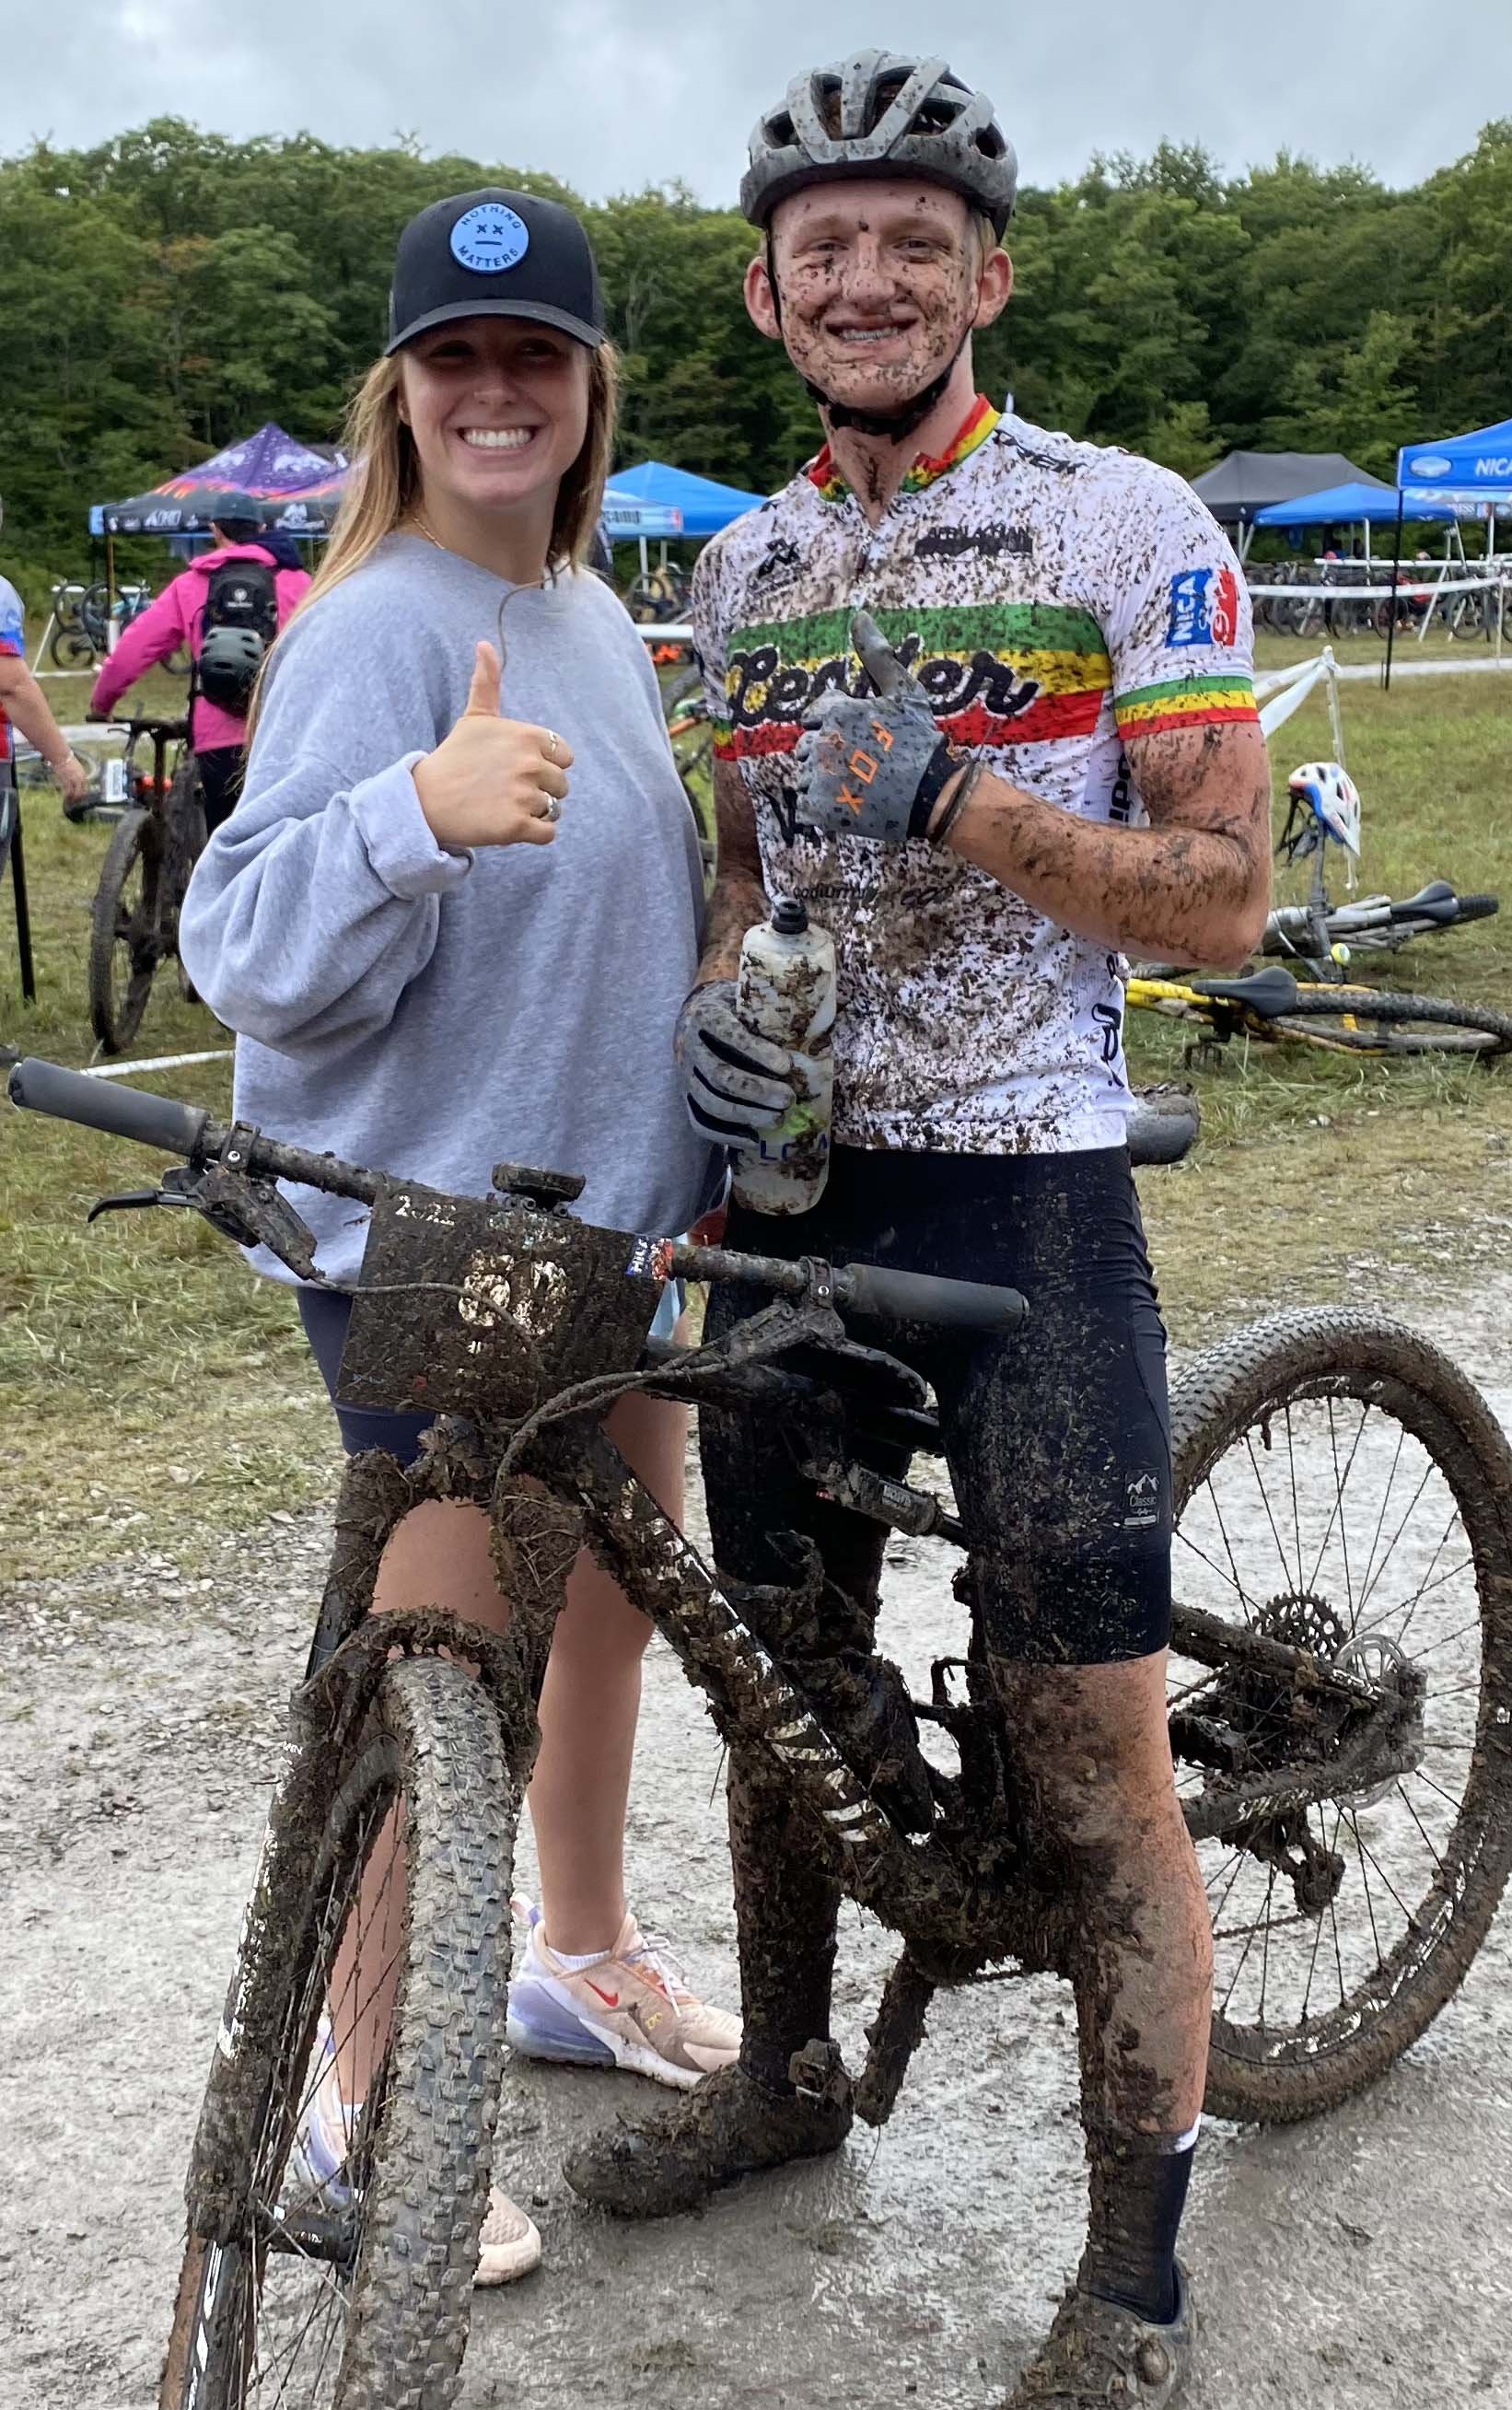  Celebrating with his sister McKenzie following a win at the 2022 WV NICA Race #2 